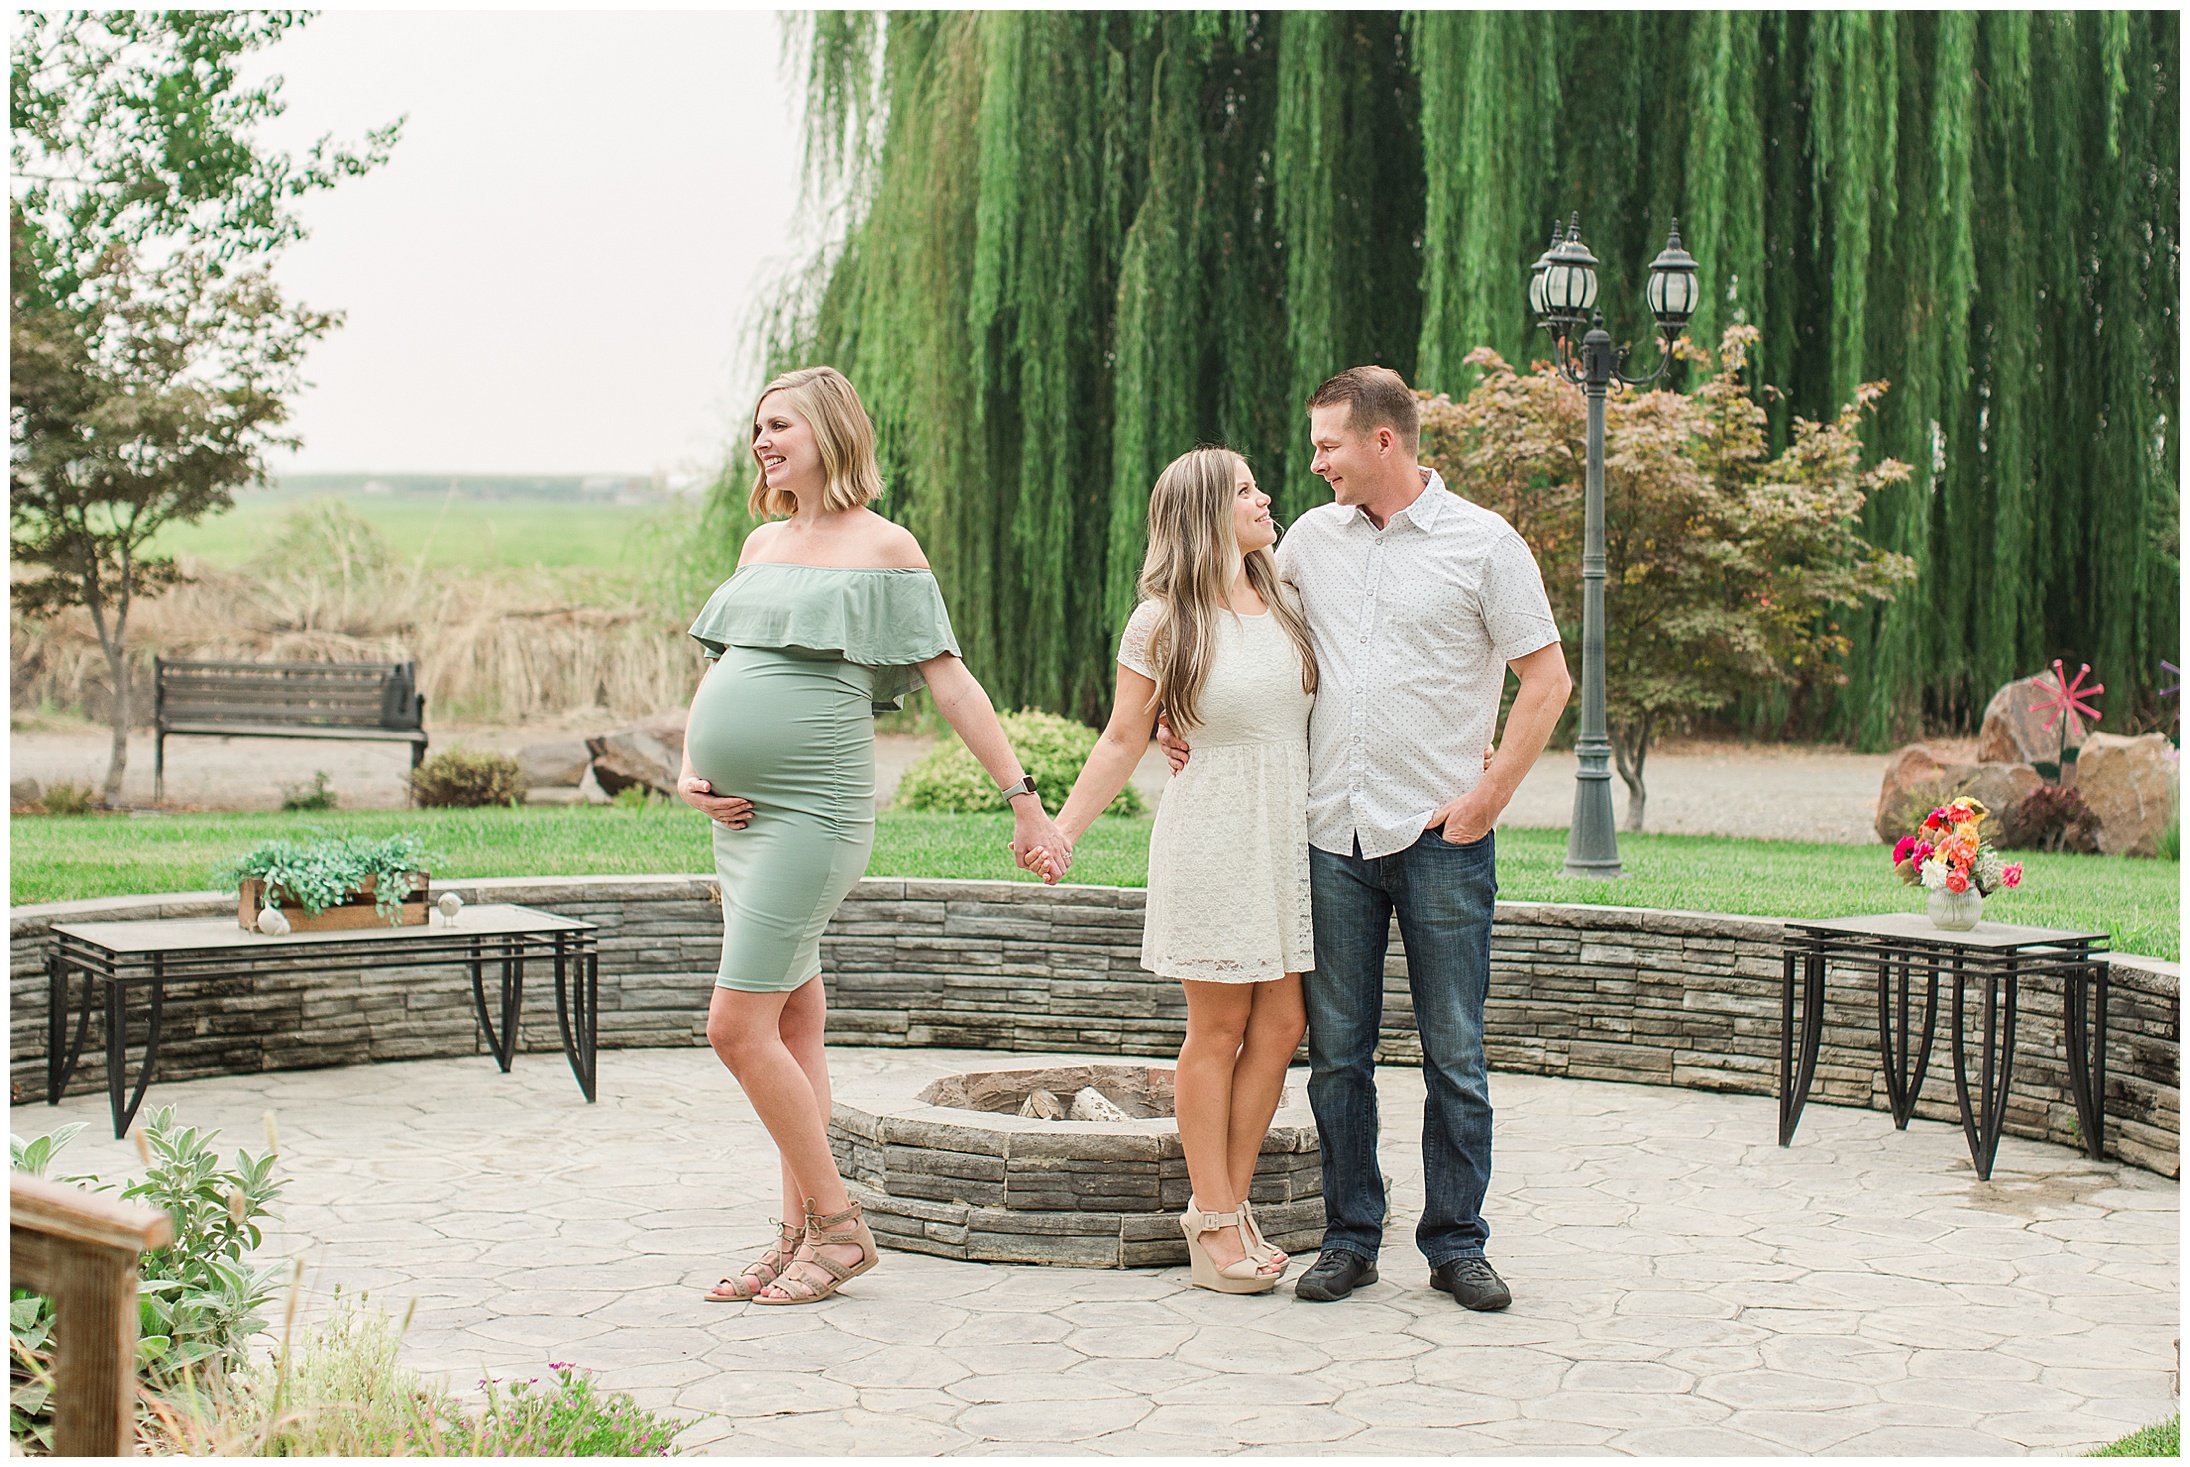 Maternity Surrogate Session Willows CA Willow Tree Surrogacy,